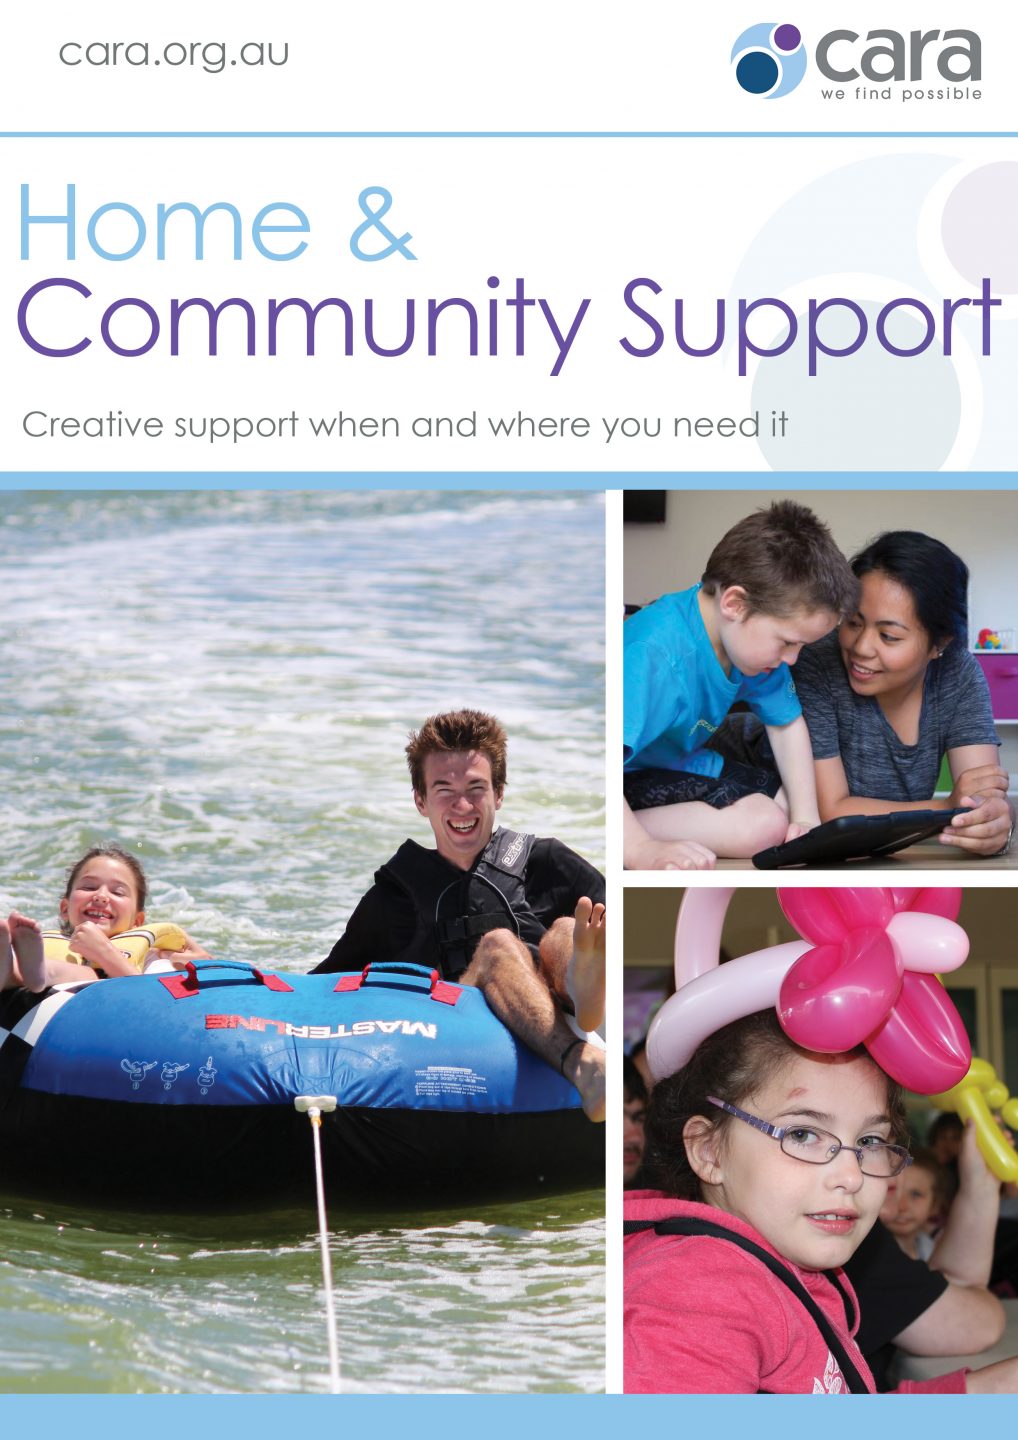 Home & Community Support